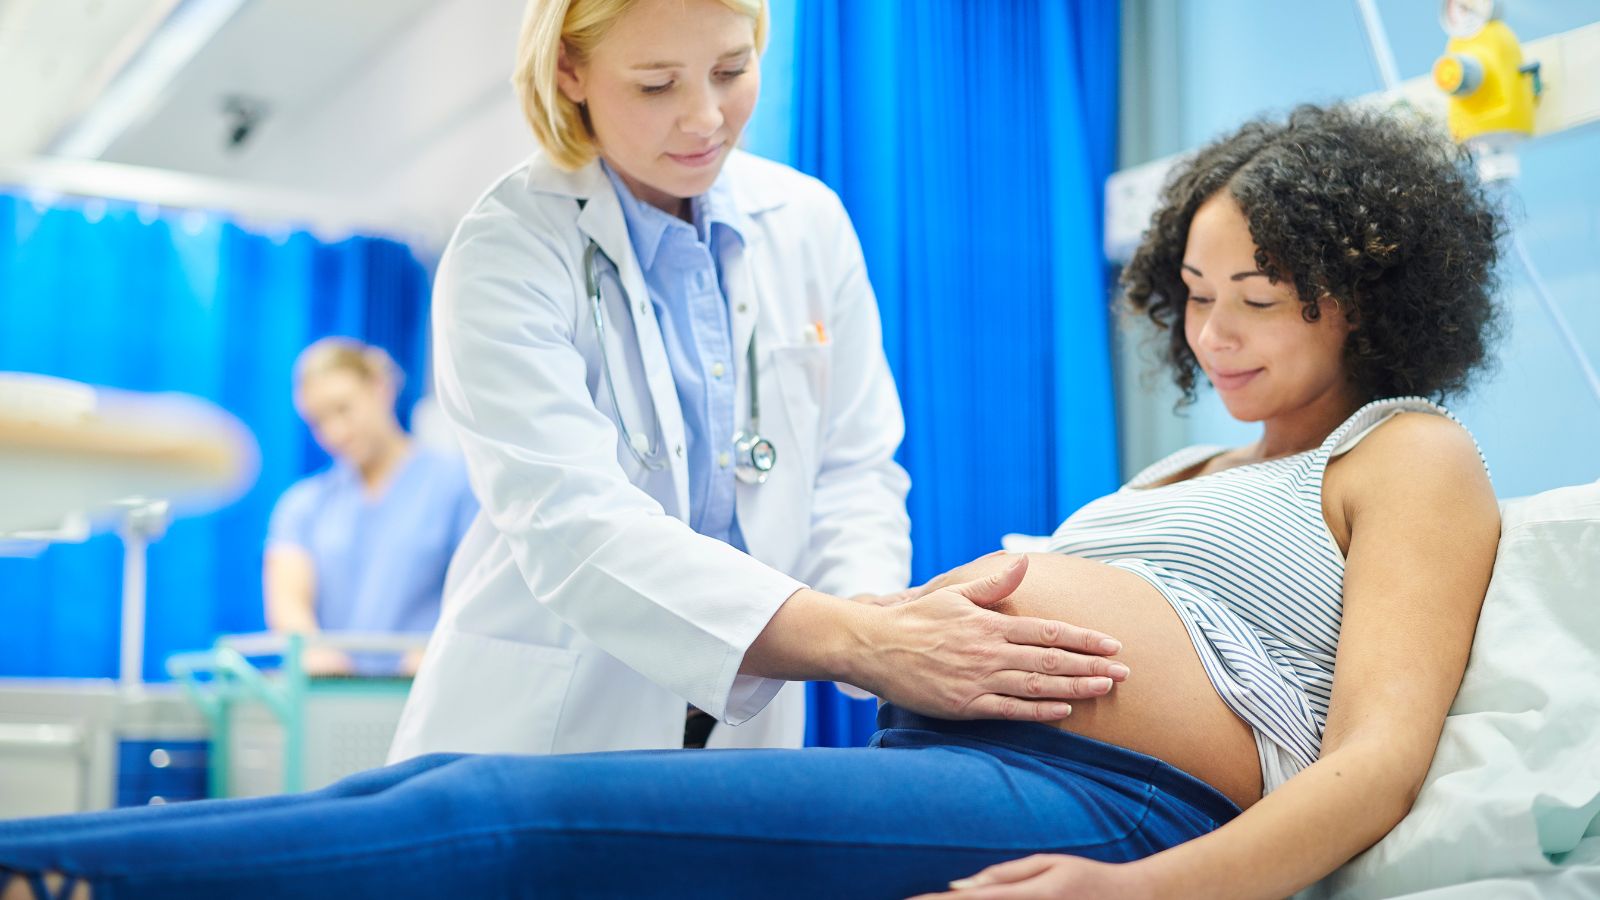 Confronting the Issue of Maternity Care Deserts